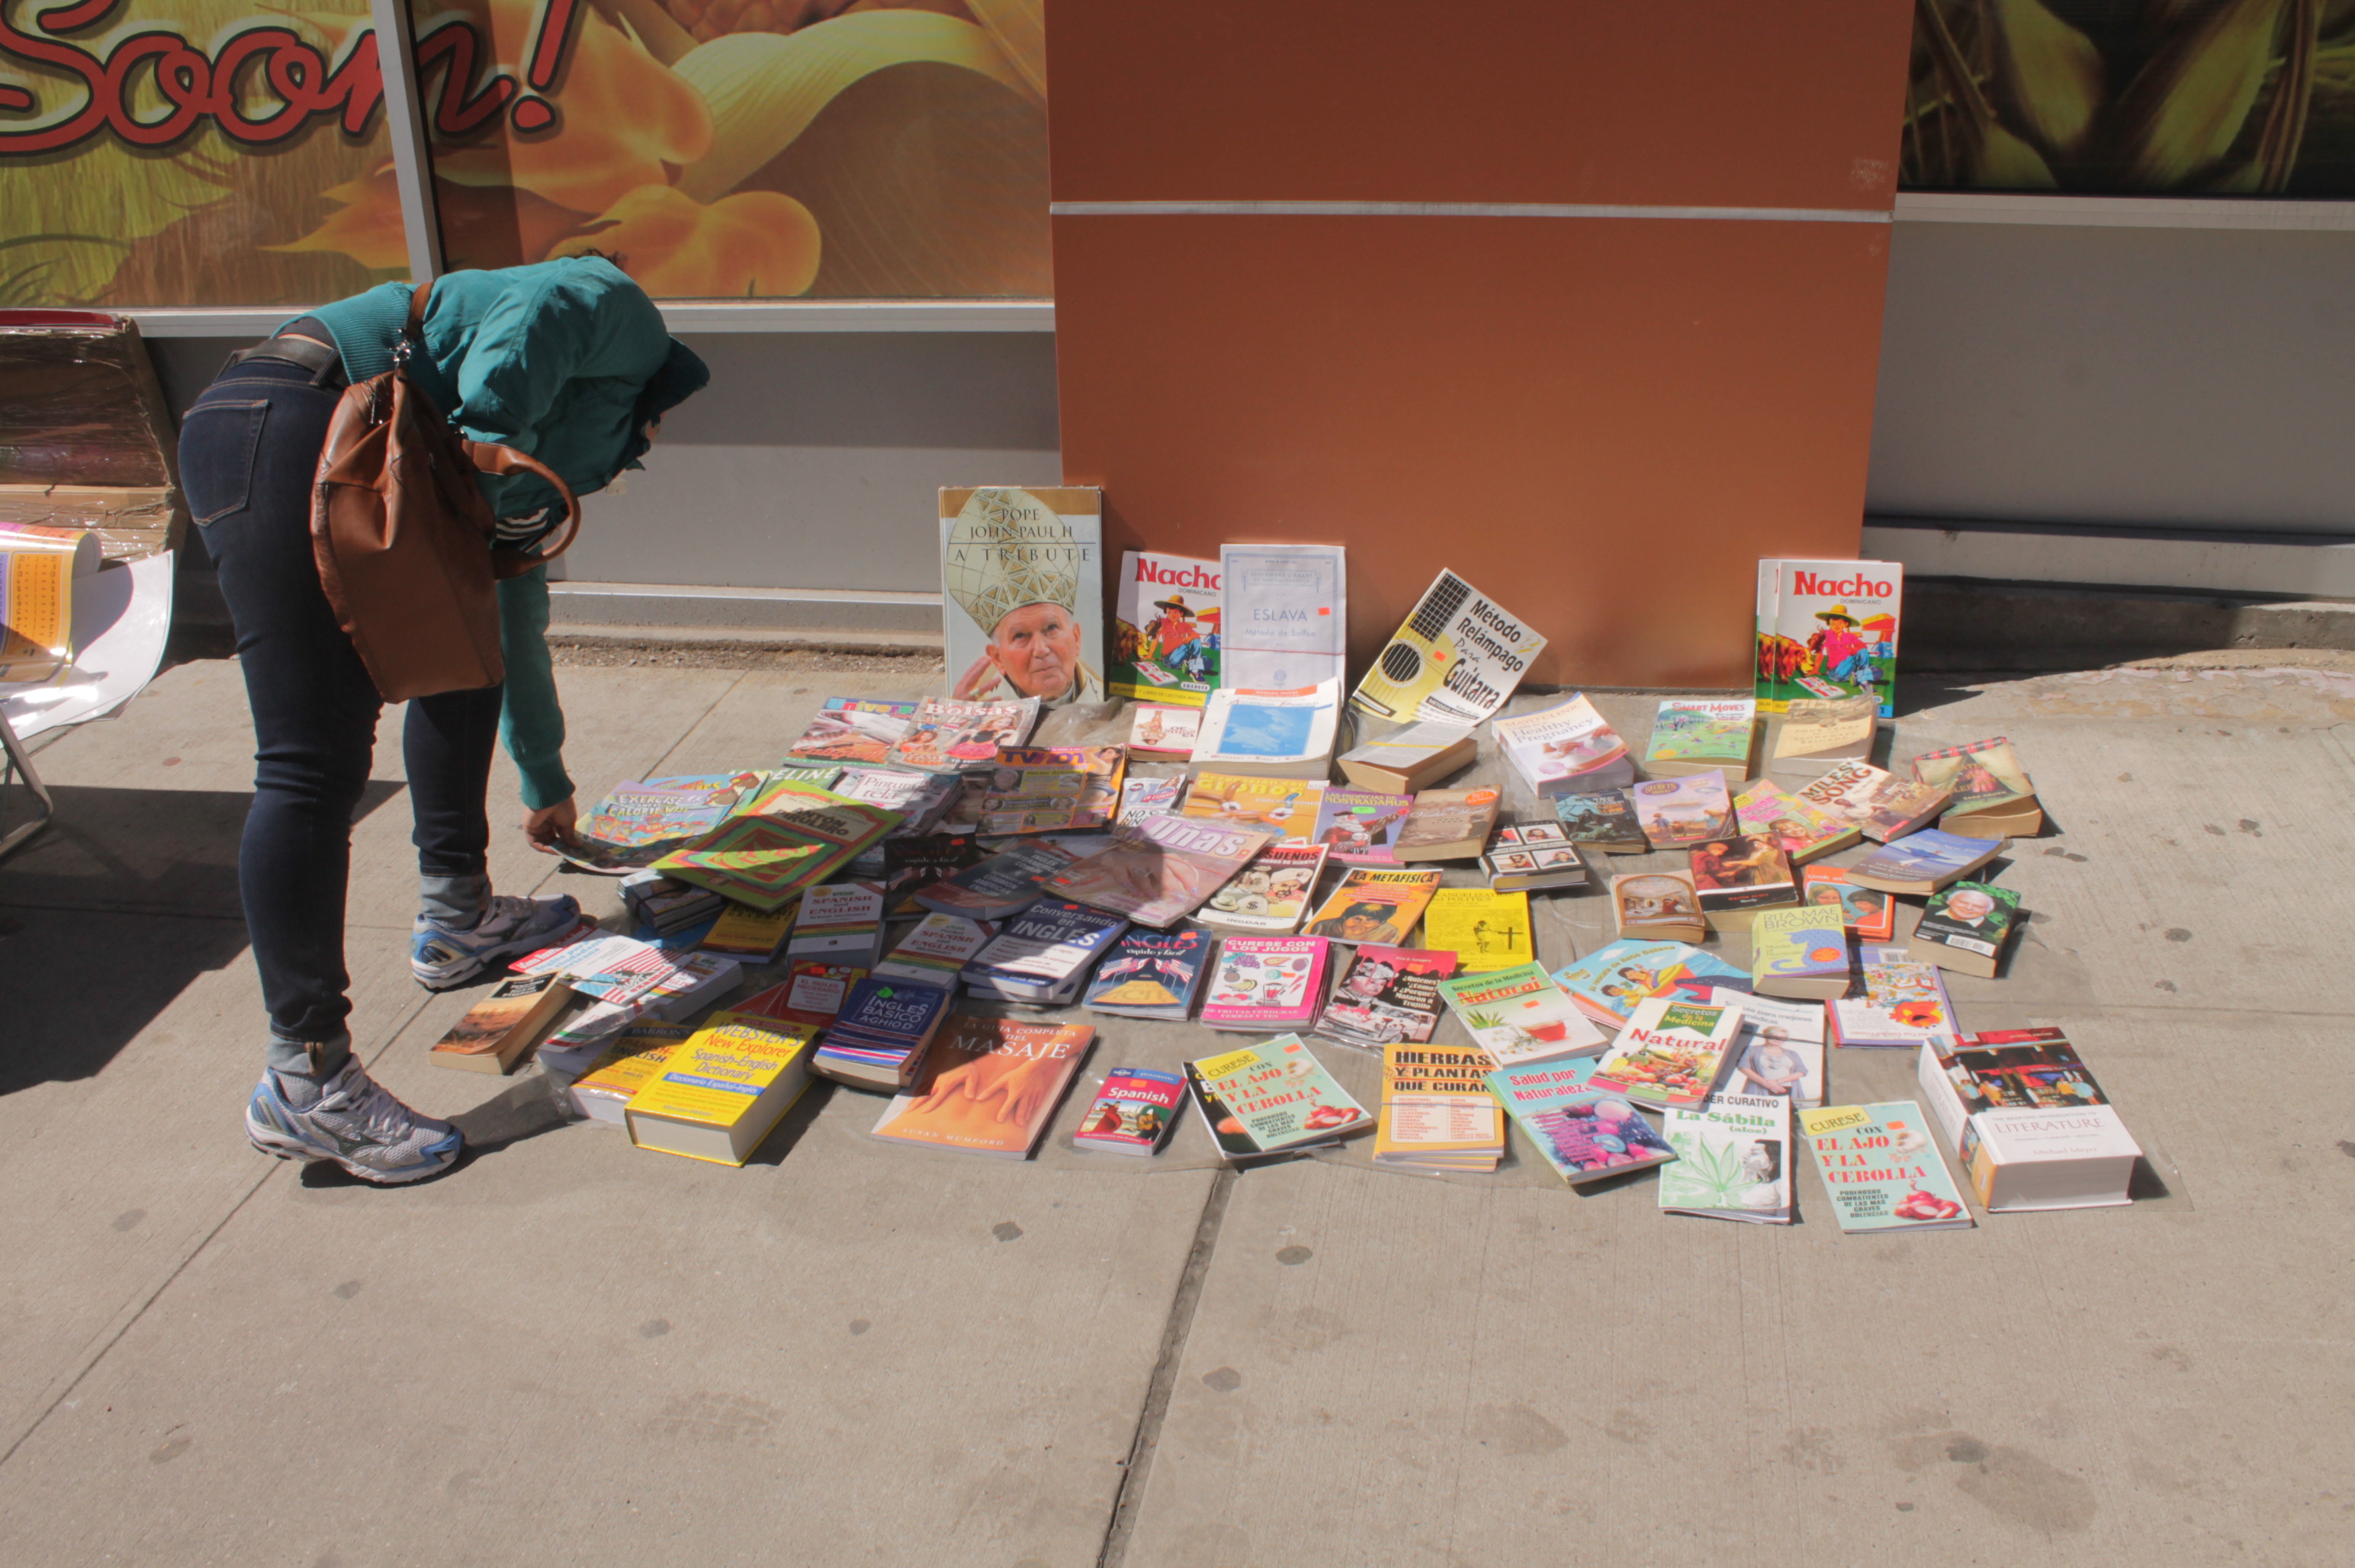 Photograph of a woman browsing through a pile of books for sale on the sidewalk